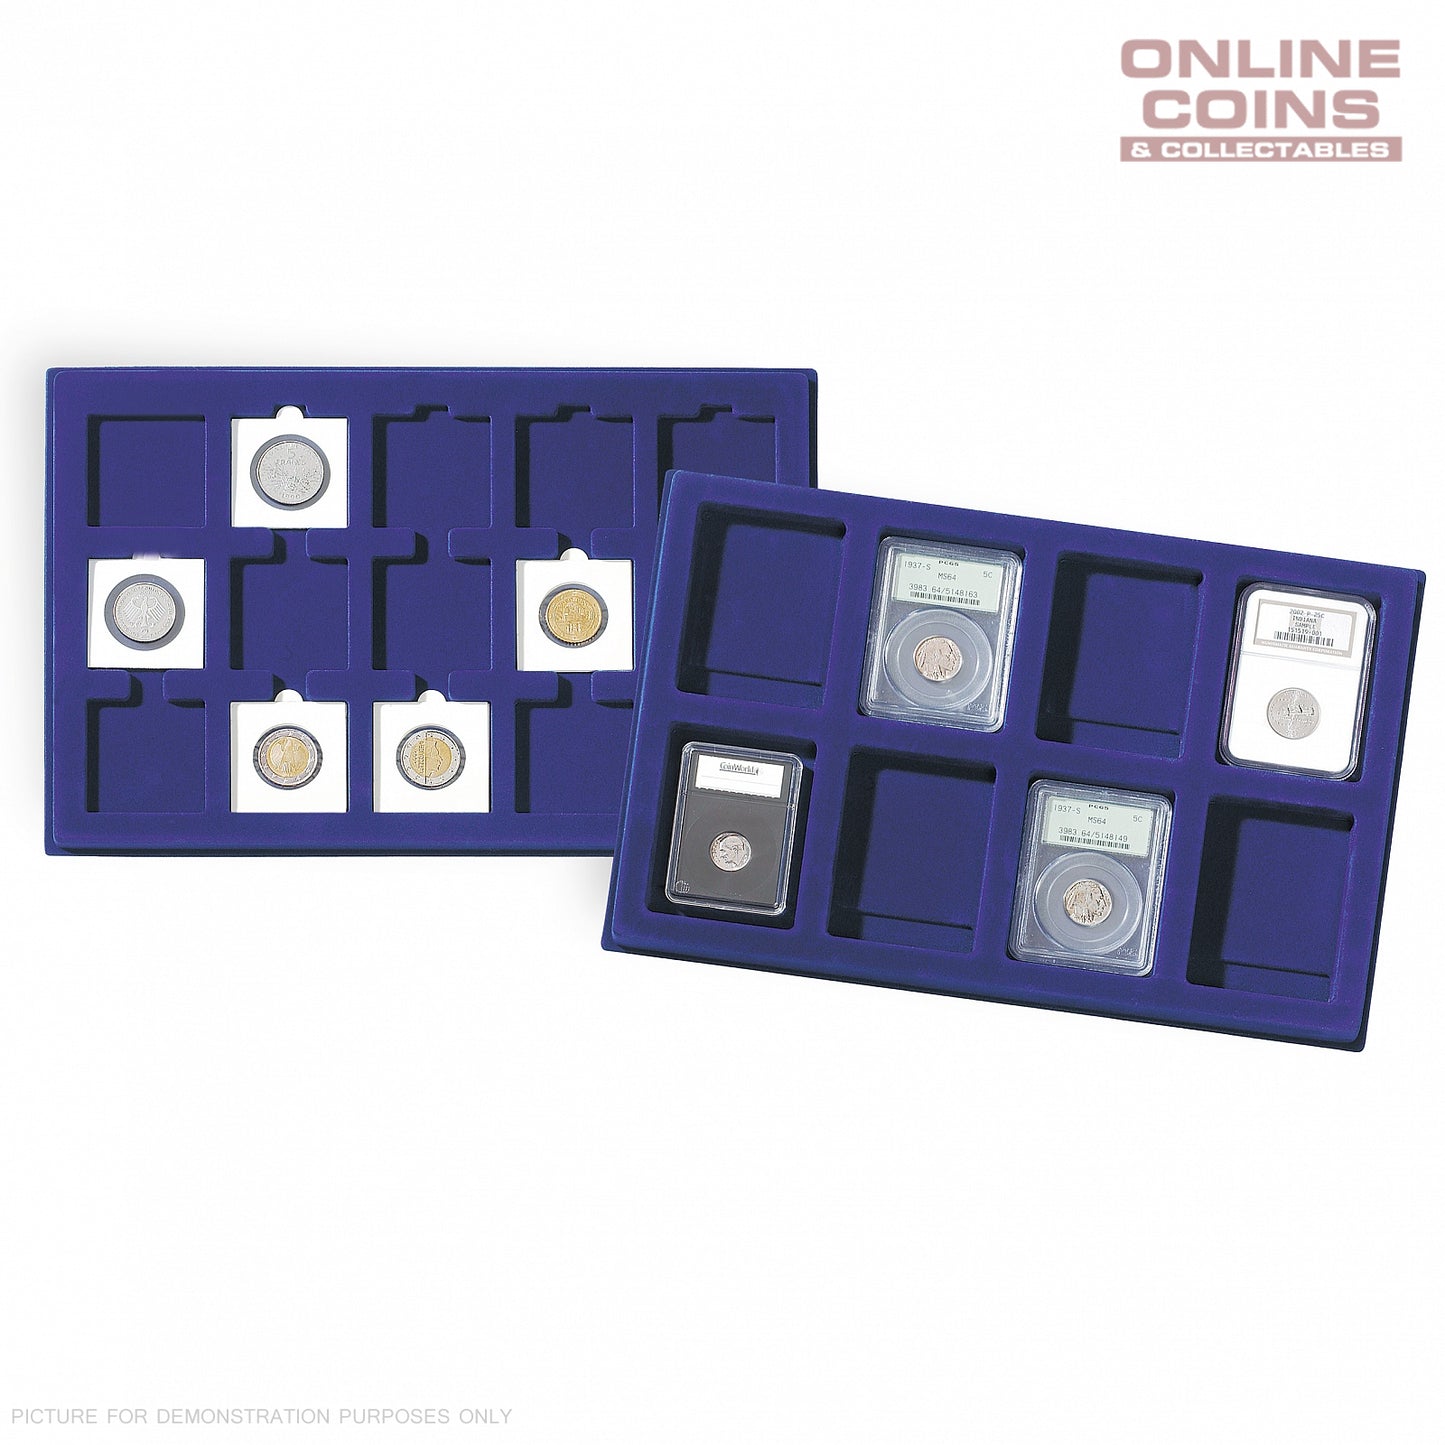 Lighthouse Coin Presentation Trays x 2 TAB45 Blue - Holds 45 Coins up to 31mm (Larger Trays)